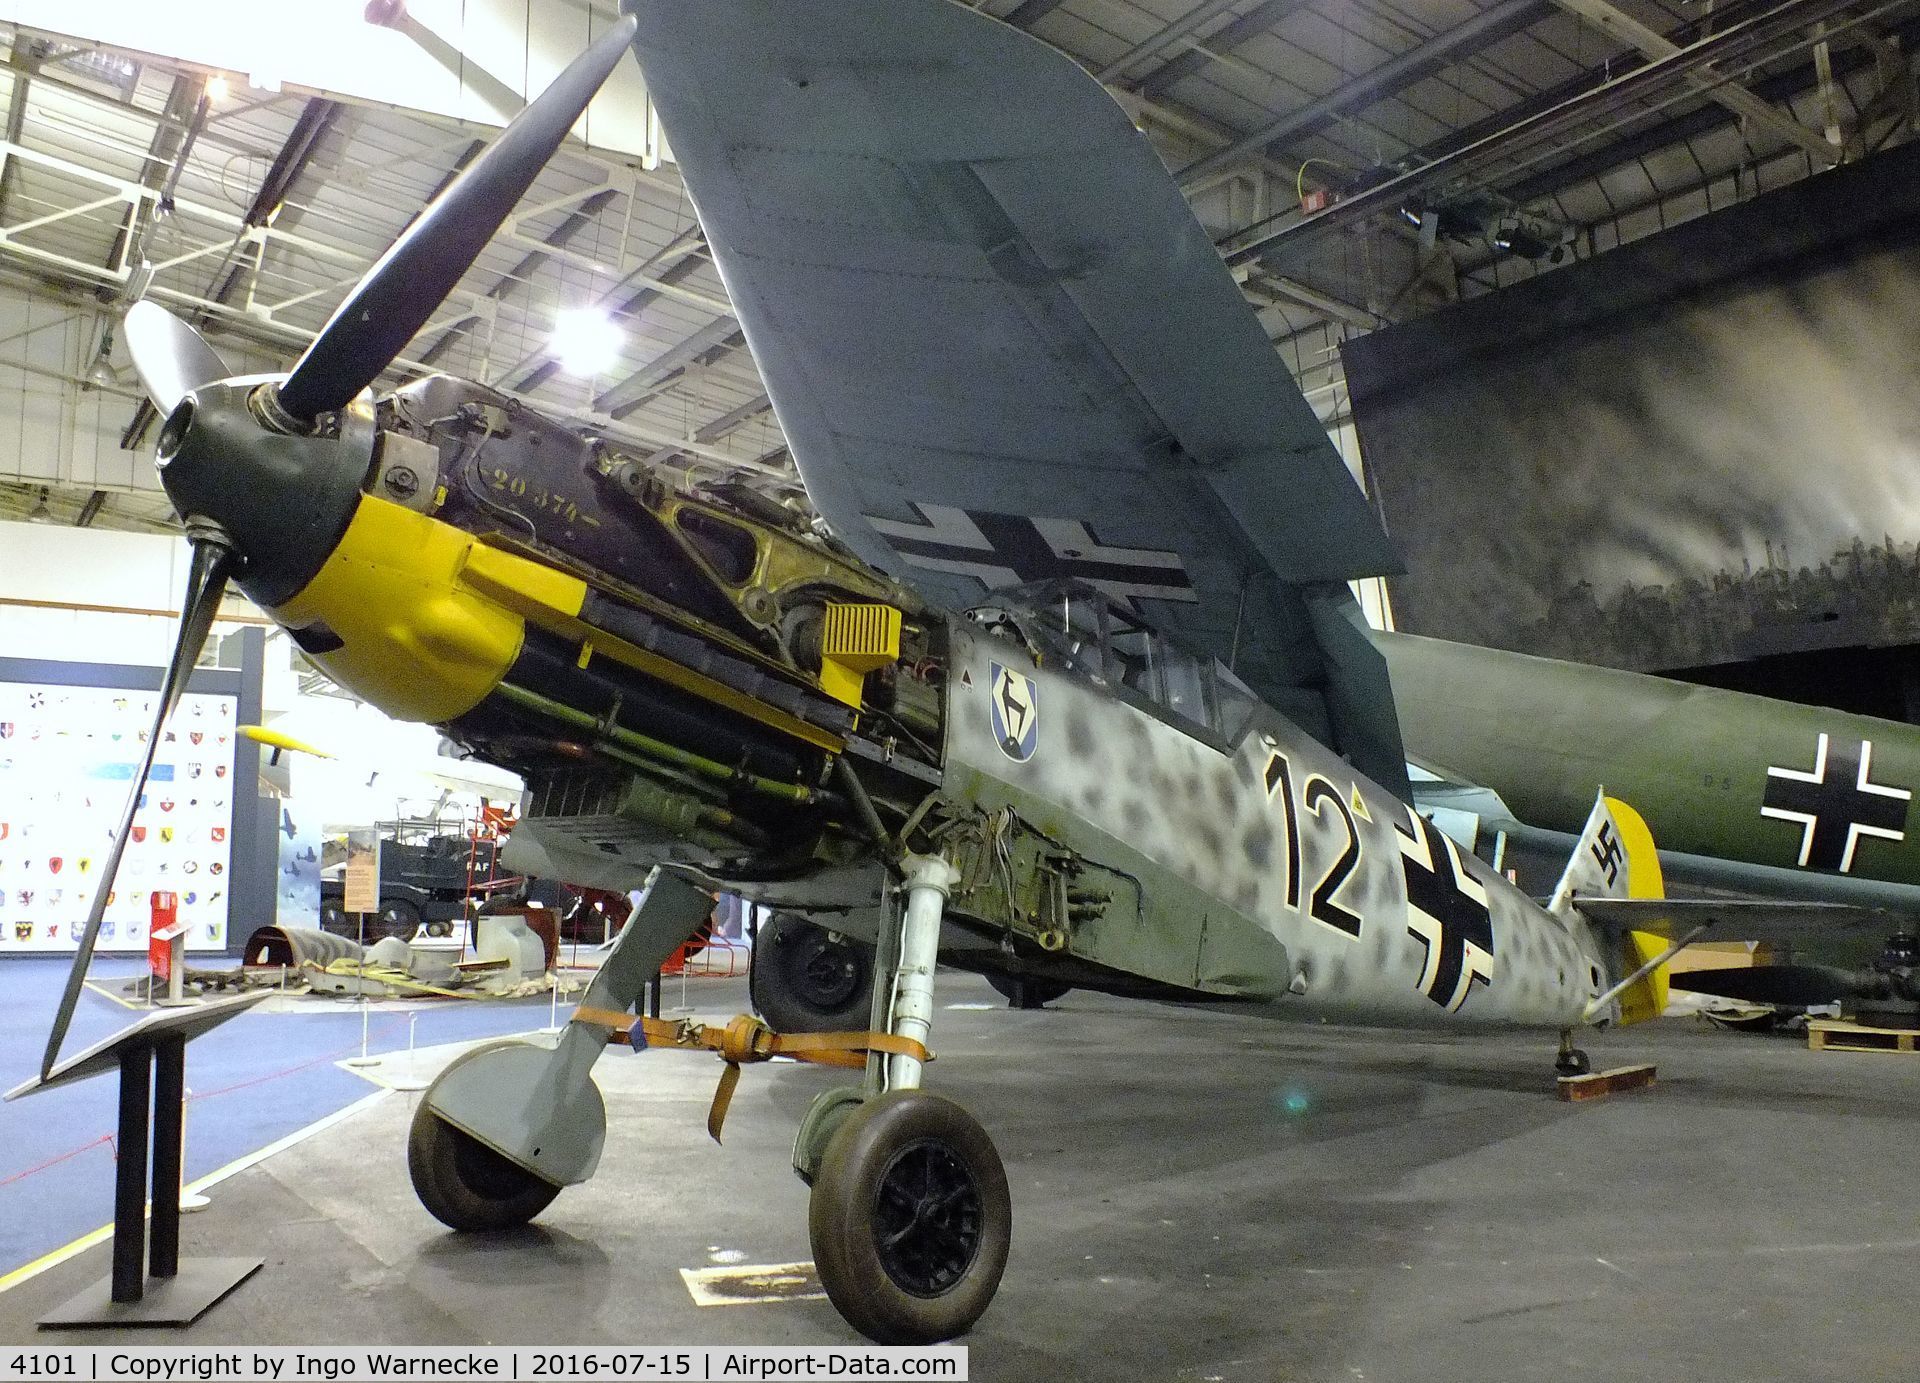 4101, 1940 Messerschmitt Bf-109E-3/B C/N 4101, Messerschmitt Bf 109E-3/B (getting dismantled for removal from the Battle of Britain Hall) at the RAF-Museum, Hendon